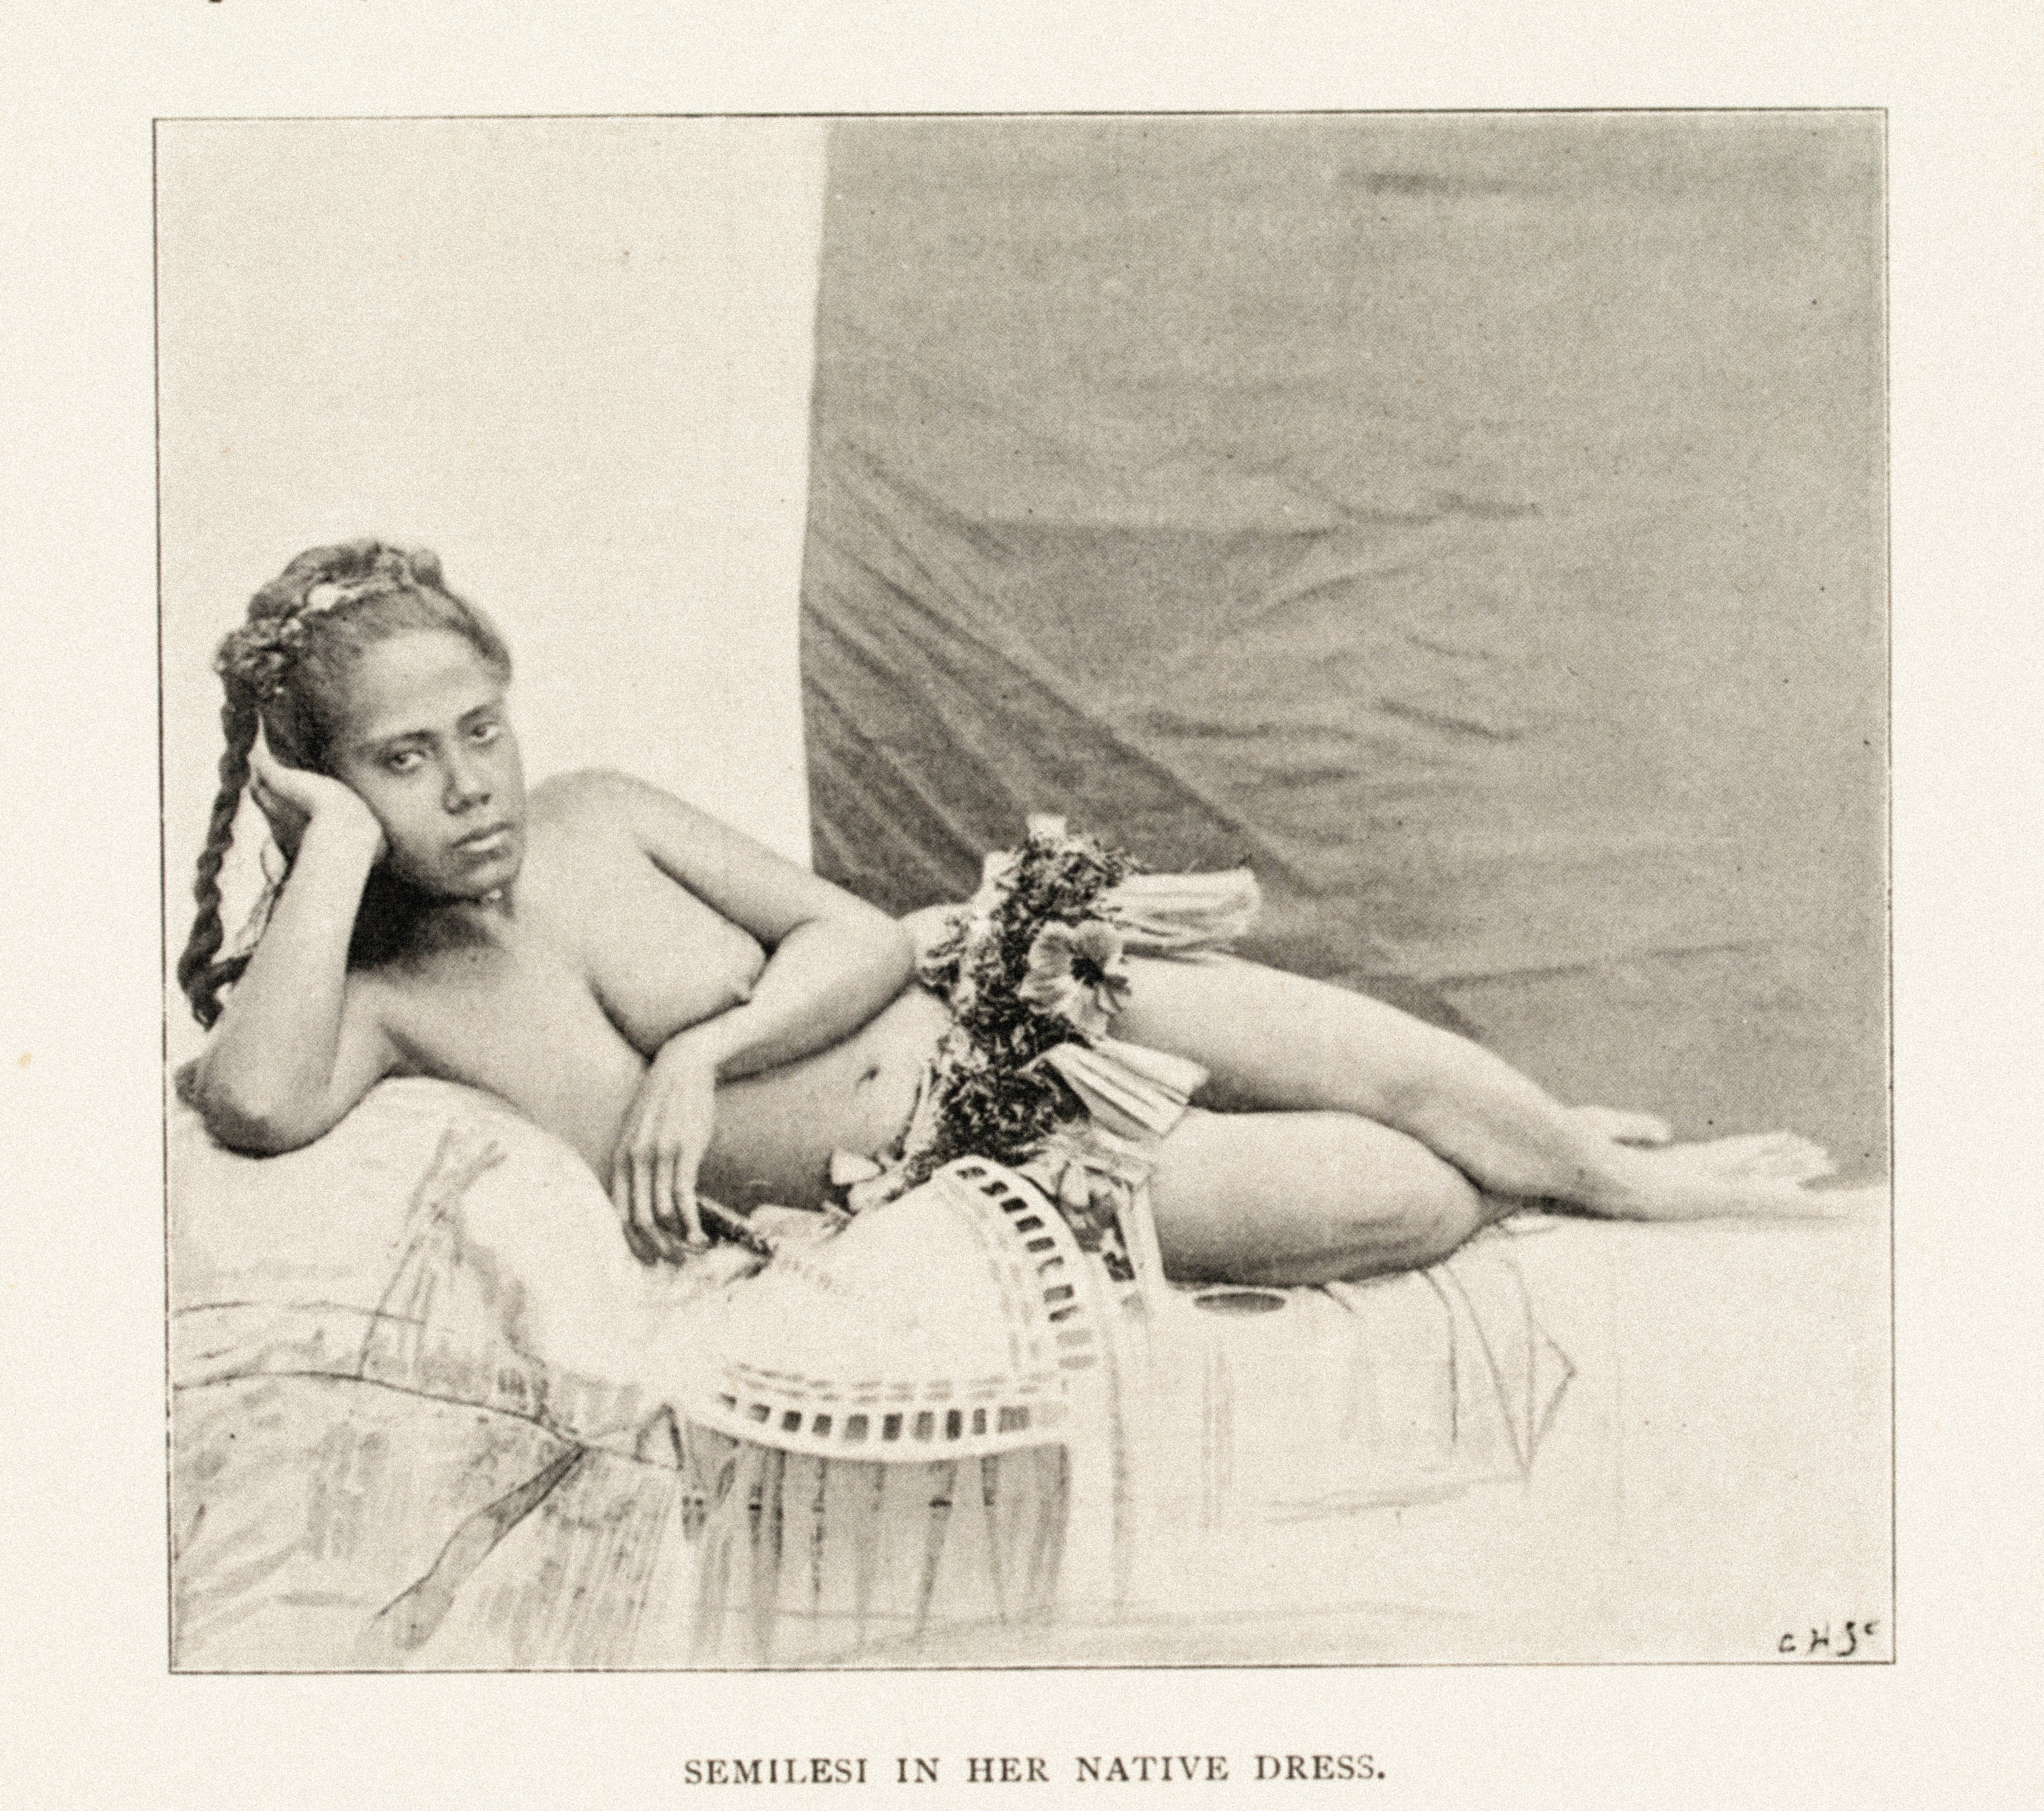 ‘Semilesi in Her Native Dress’, from Brown Men and Women, 1898, by Edward Reeves